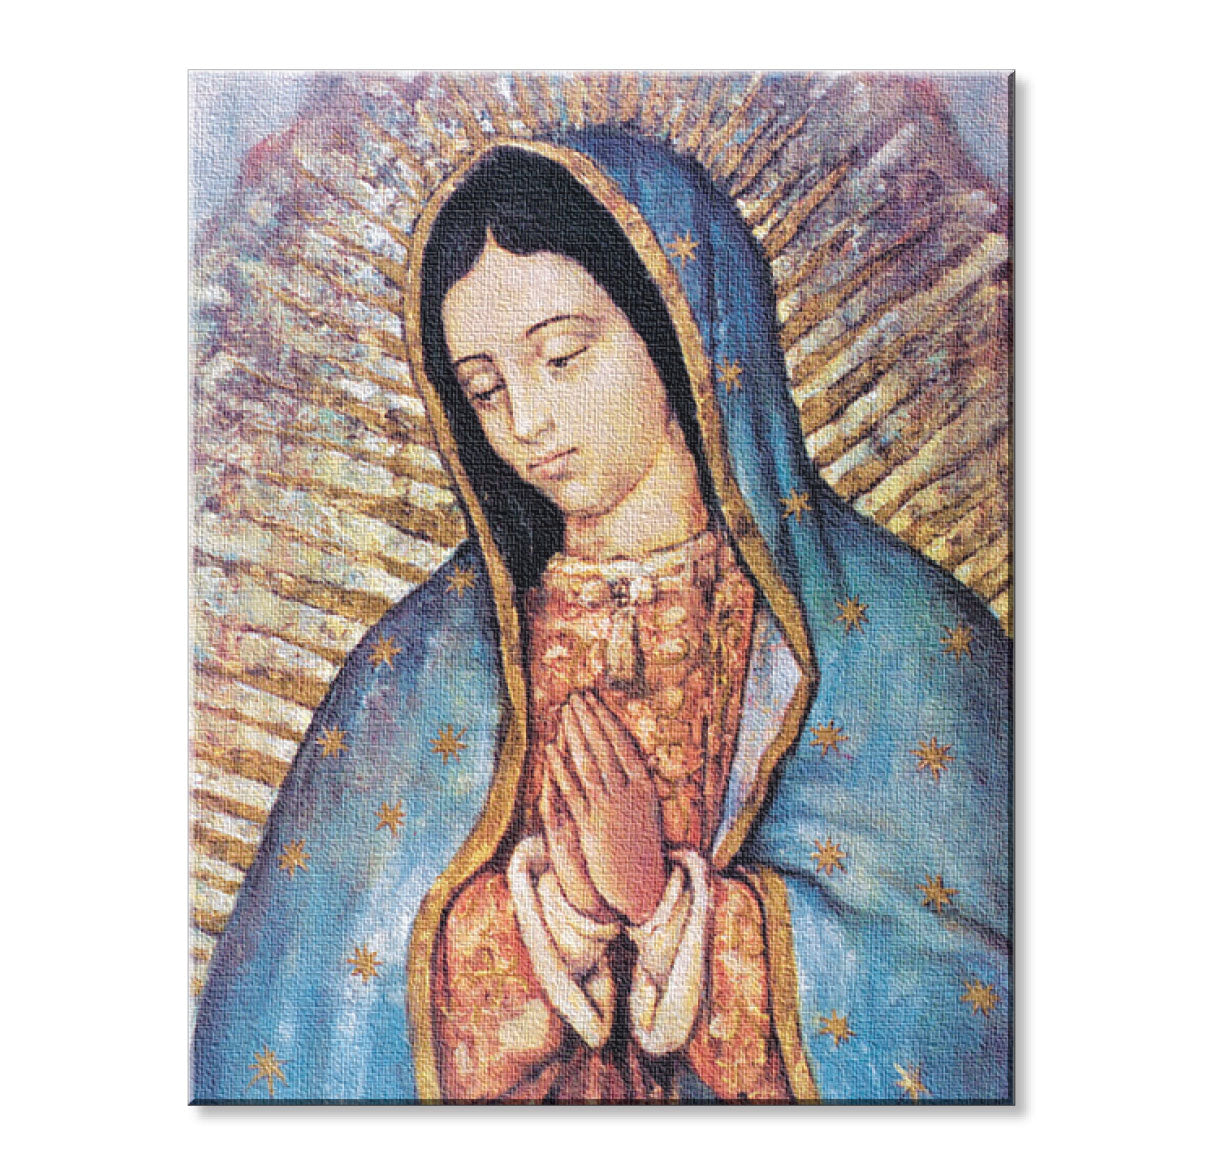 Our Lady of Guadalupe Canvas Print